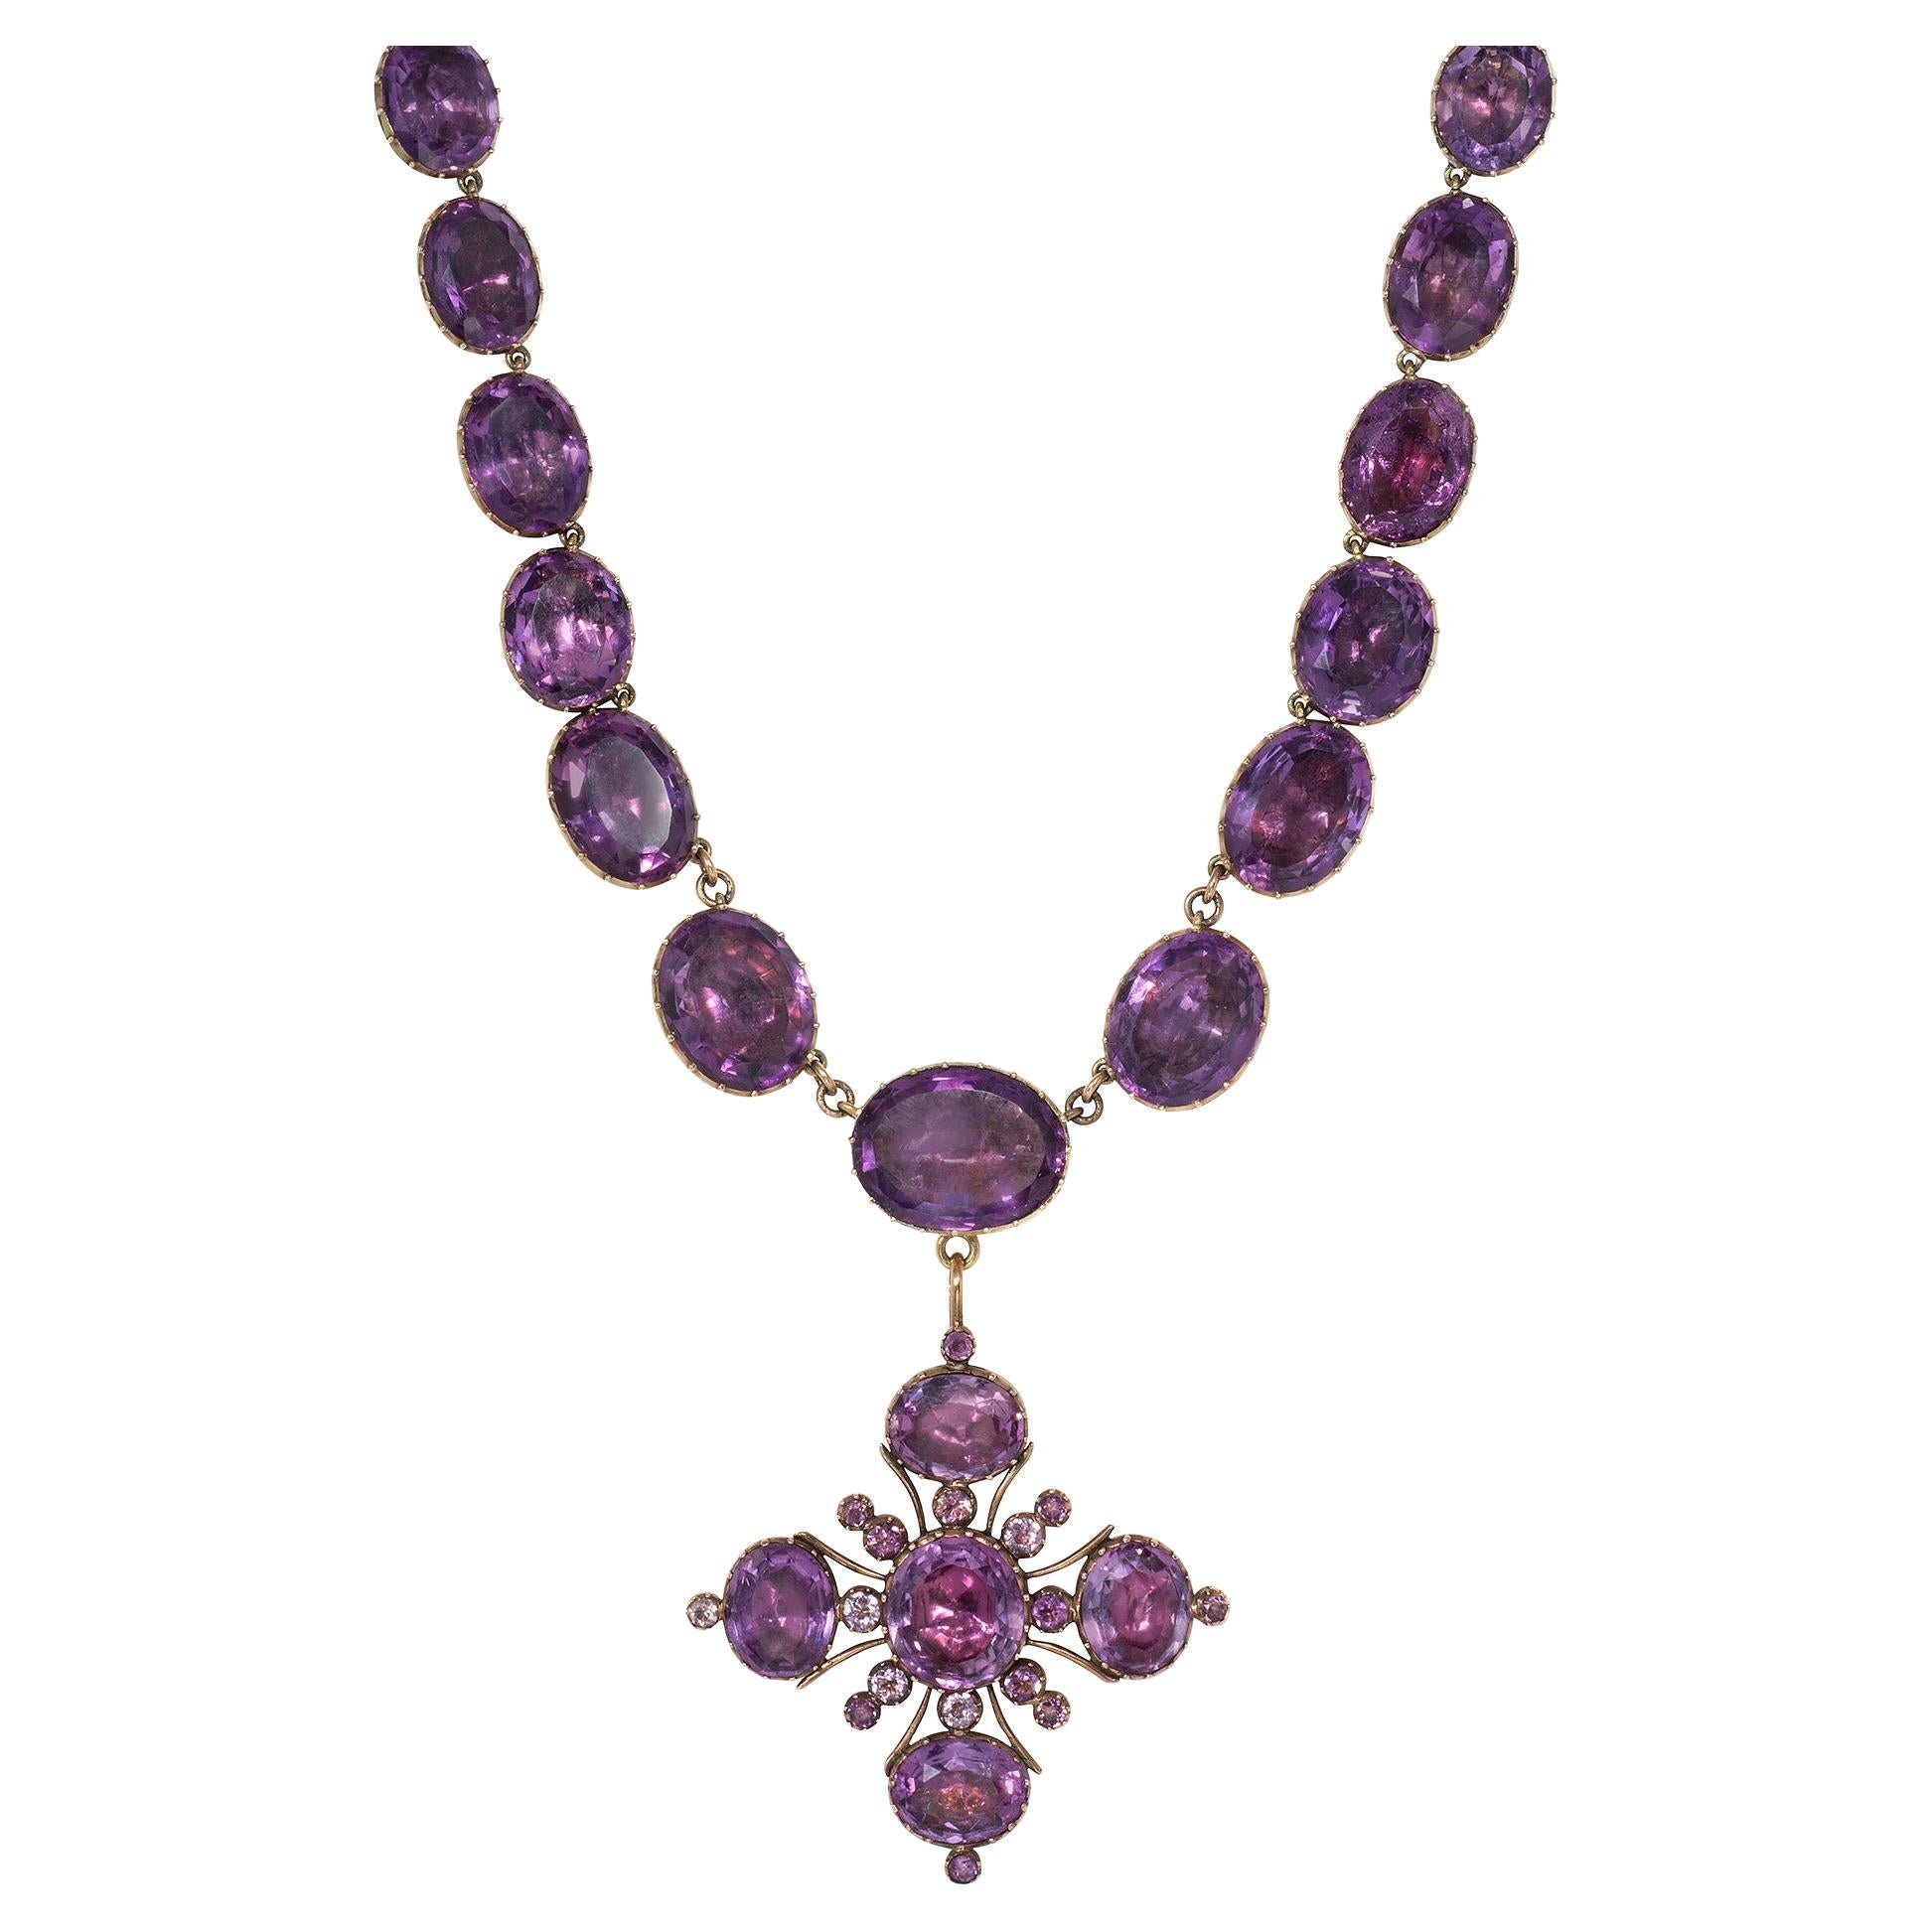 Antique Gold and Foiled Amethyst Rivière Necklace with Detachable Maltese Cross